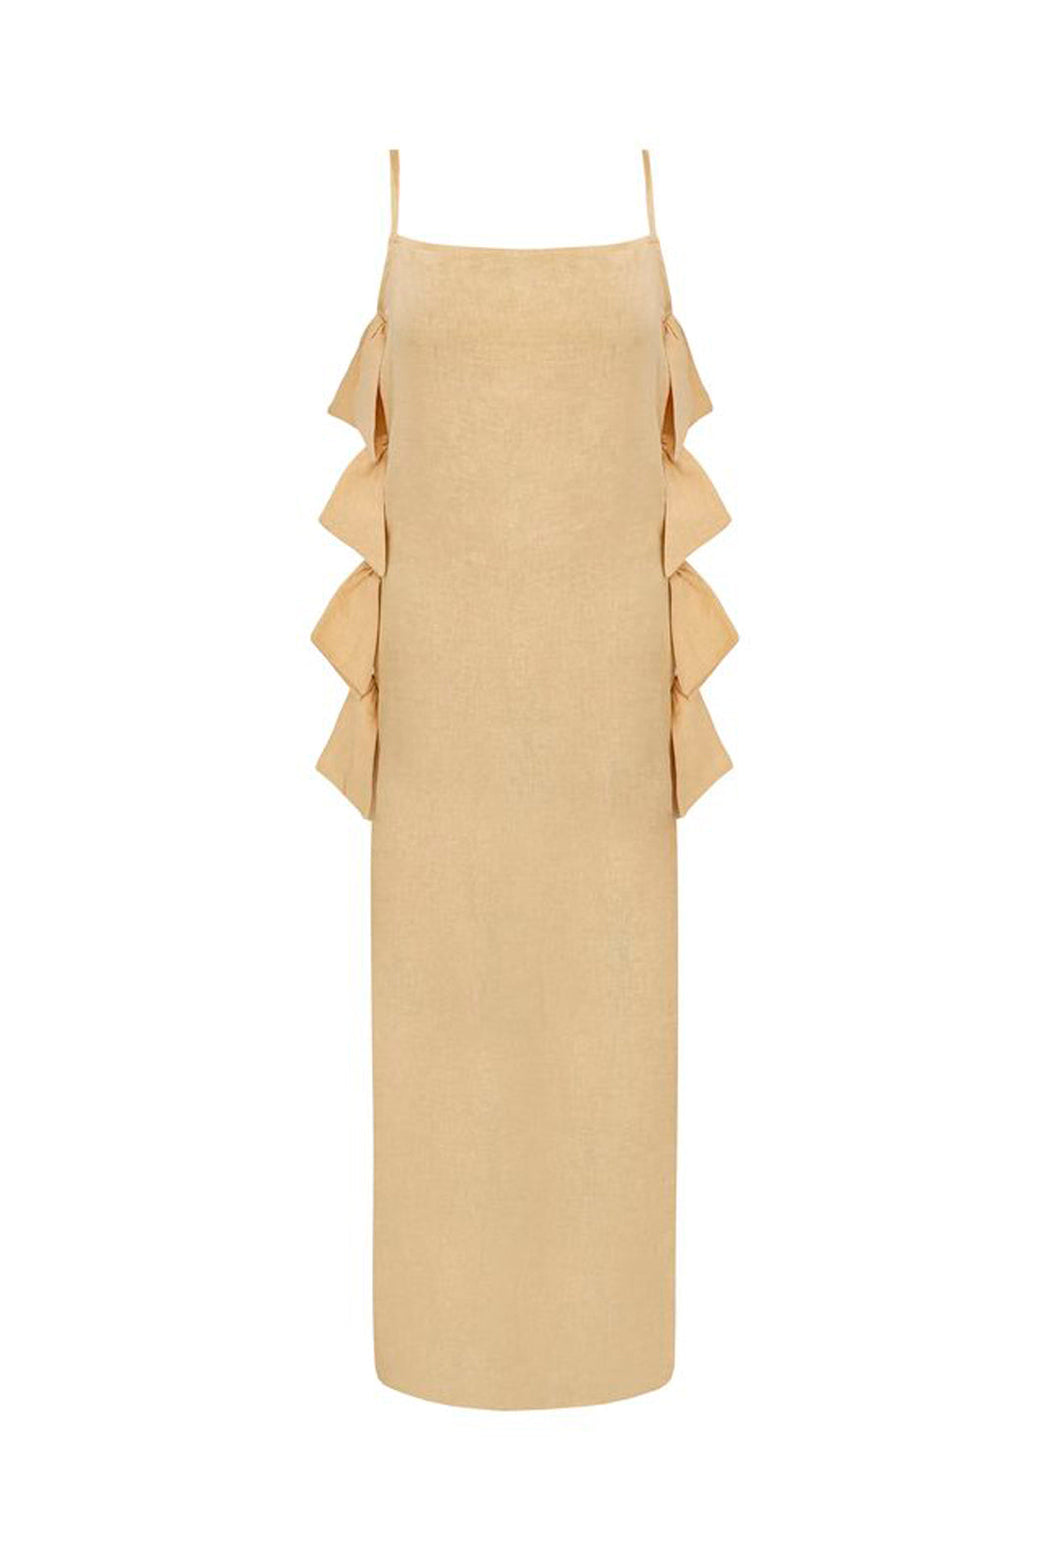 Long Beach Cover Up Lateral Bows - Linen Nuts